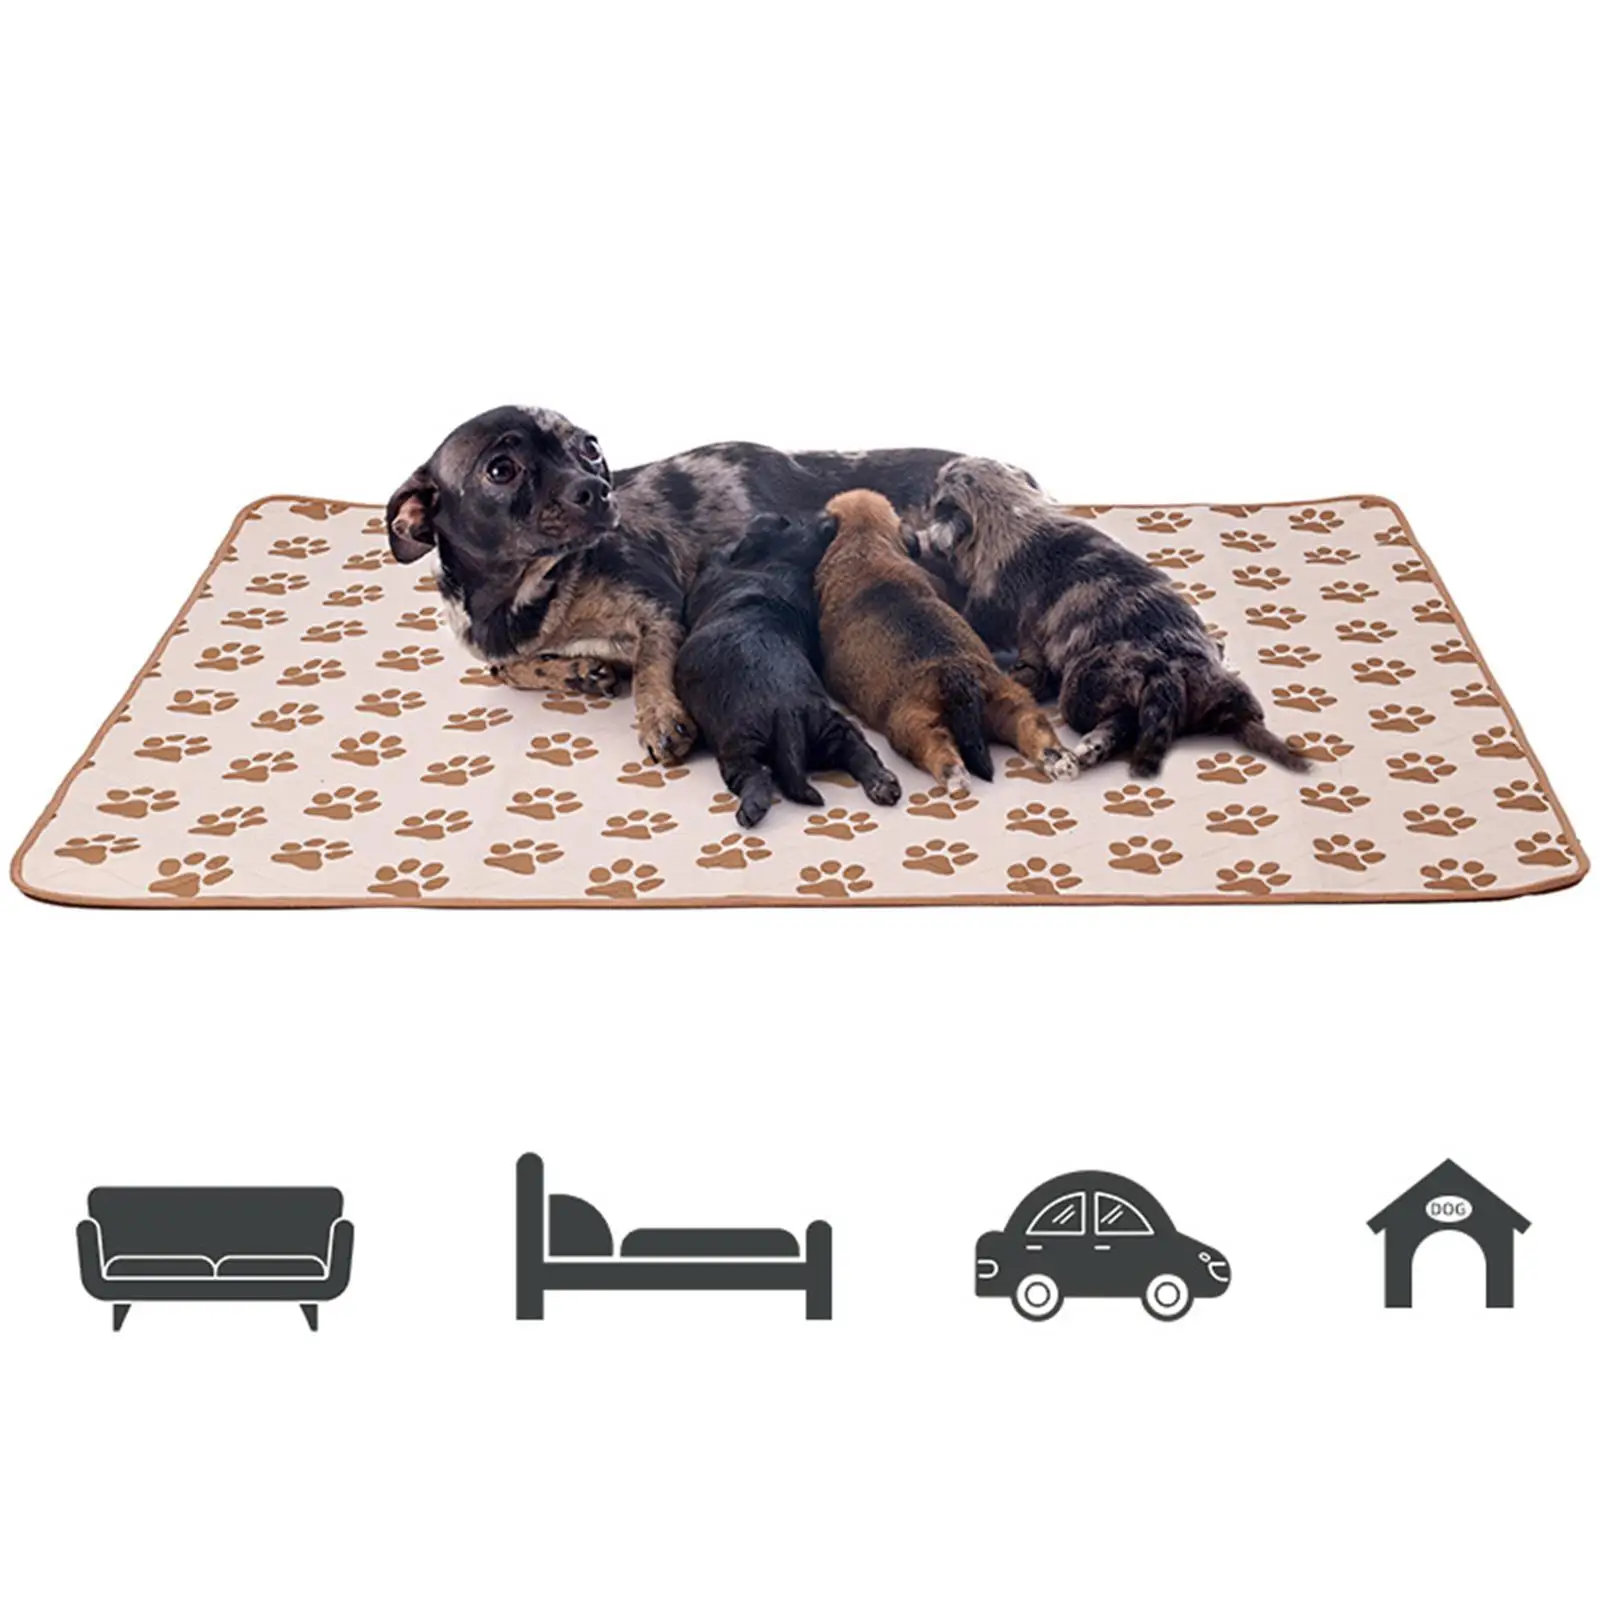 Dog Pee Pad for Puppy Kitten Crate Cushion Reusable Cat Mat Bed Sleeping Pad